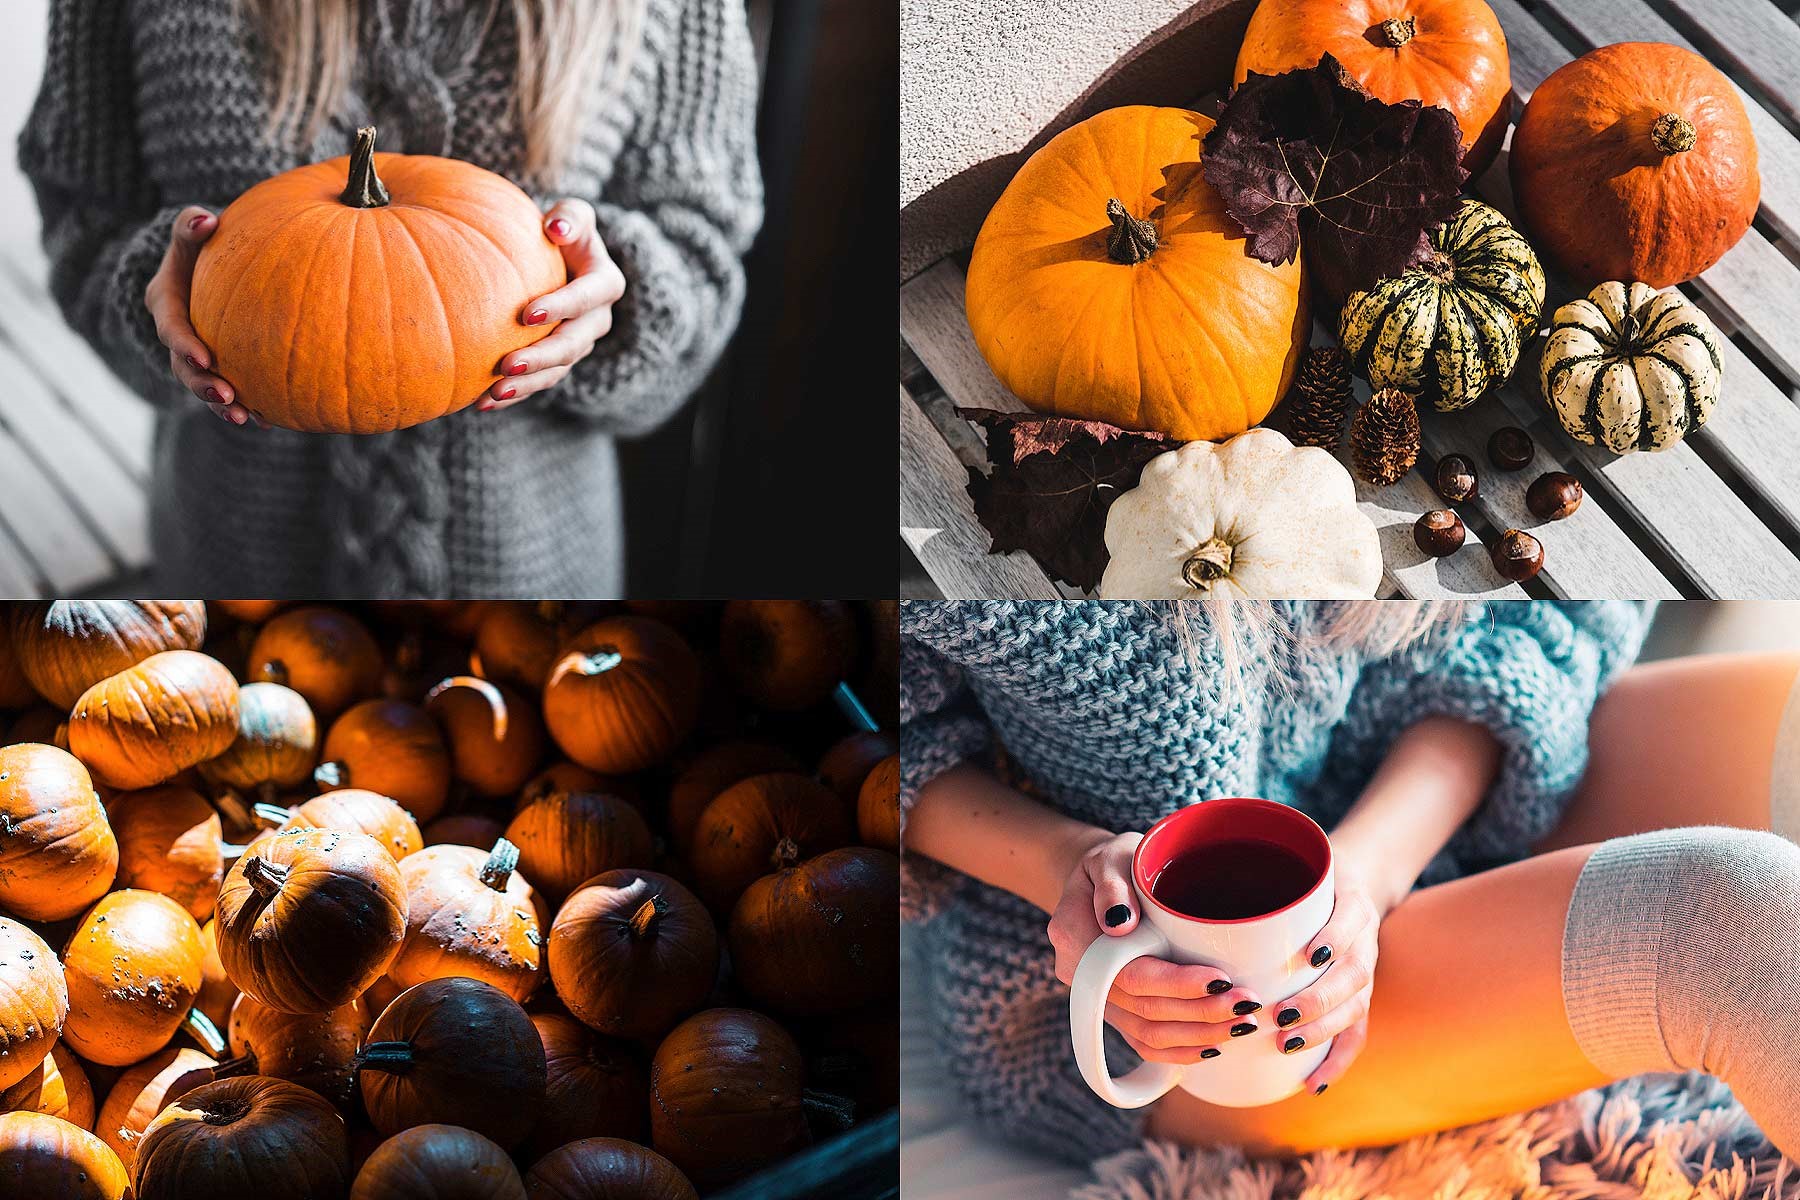 Our Favorite Autumn Activities in San Diego: Have no fear, Pumpkin Spice season is here! ﻿